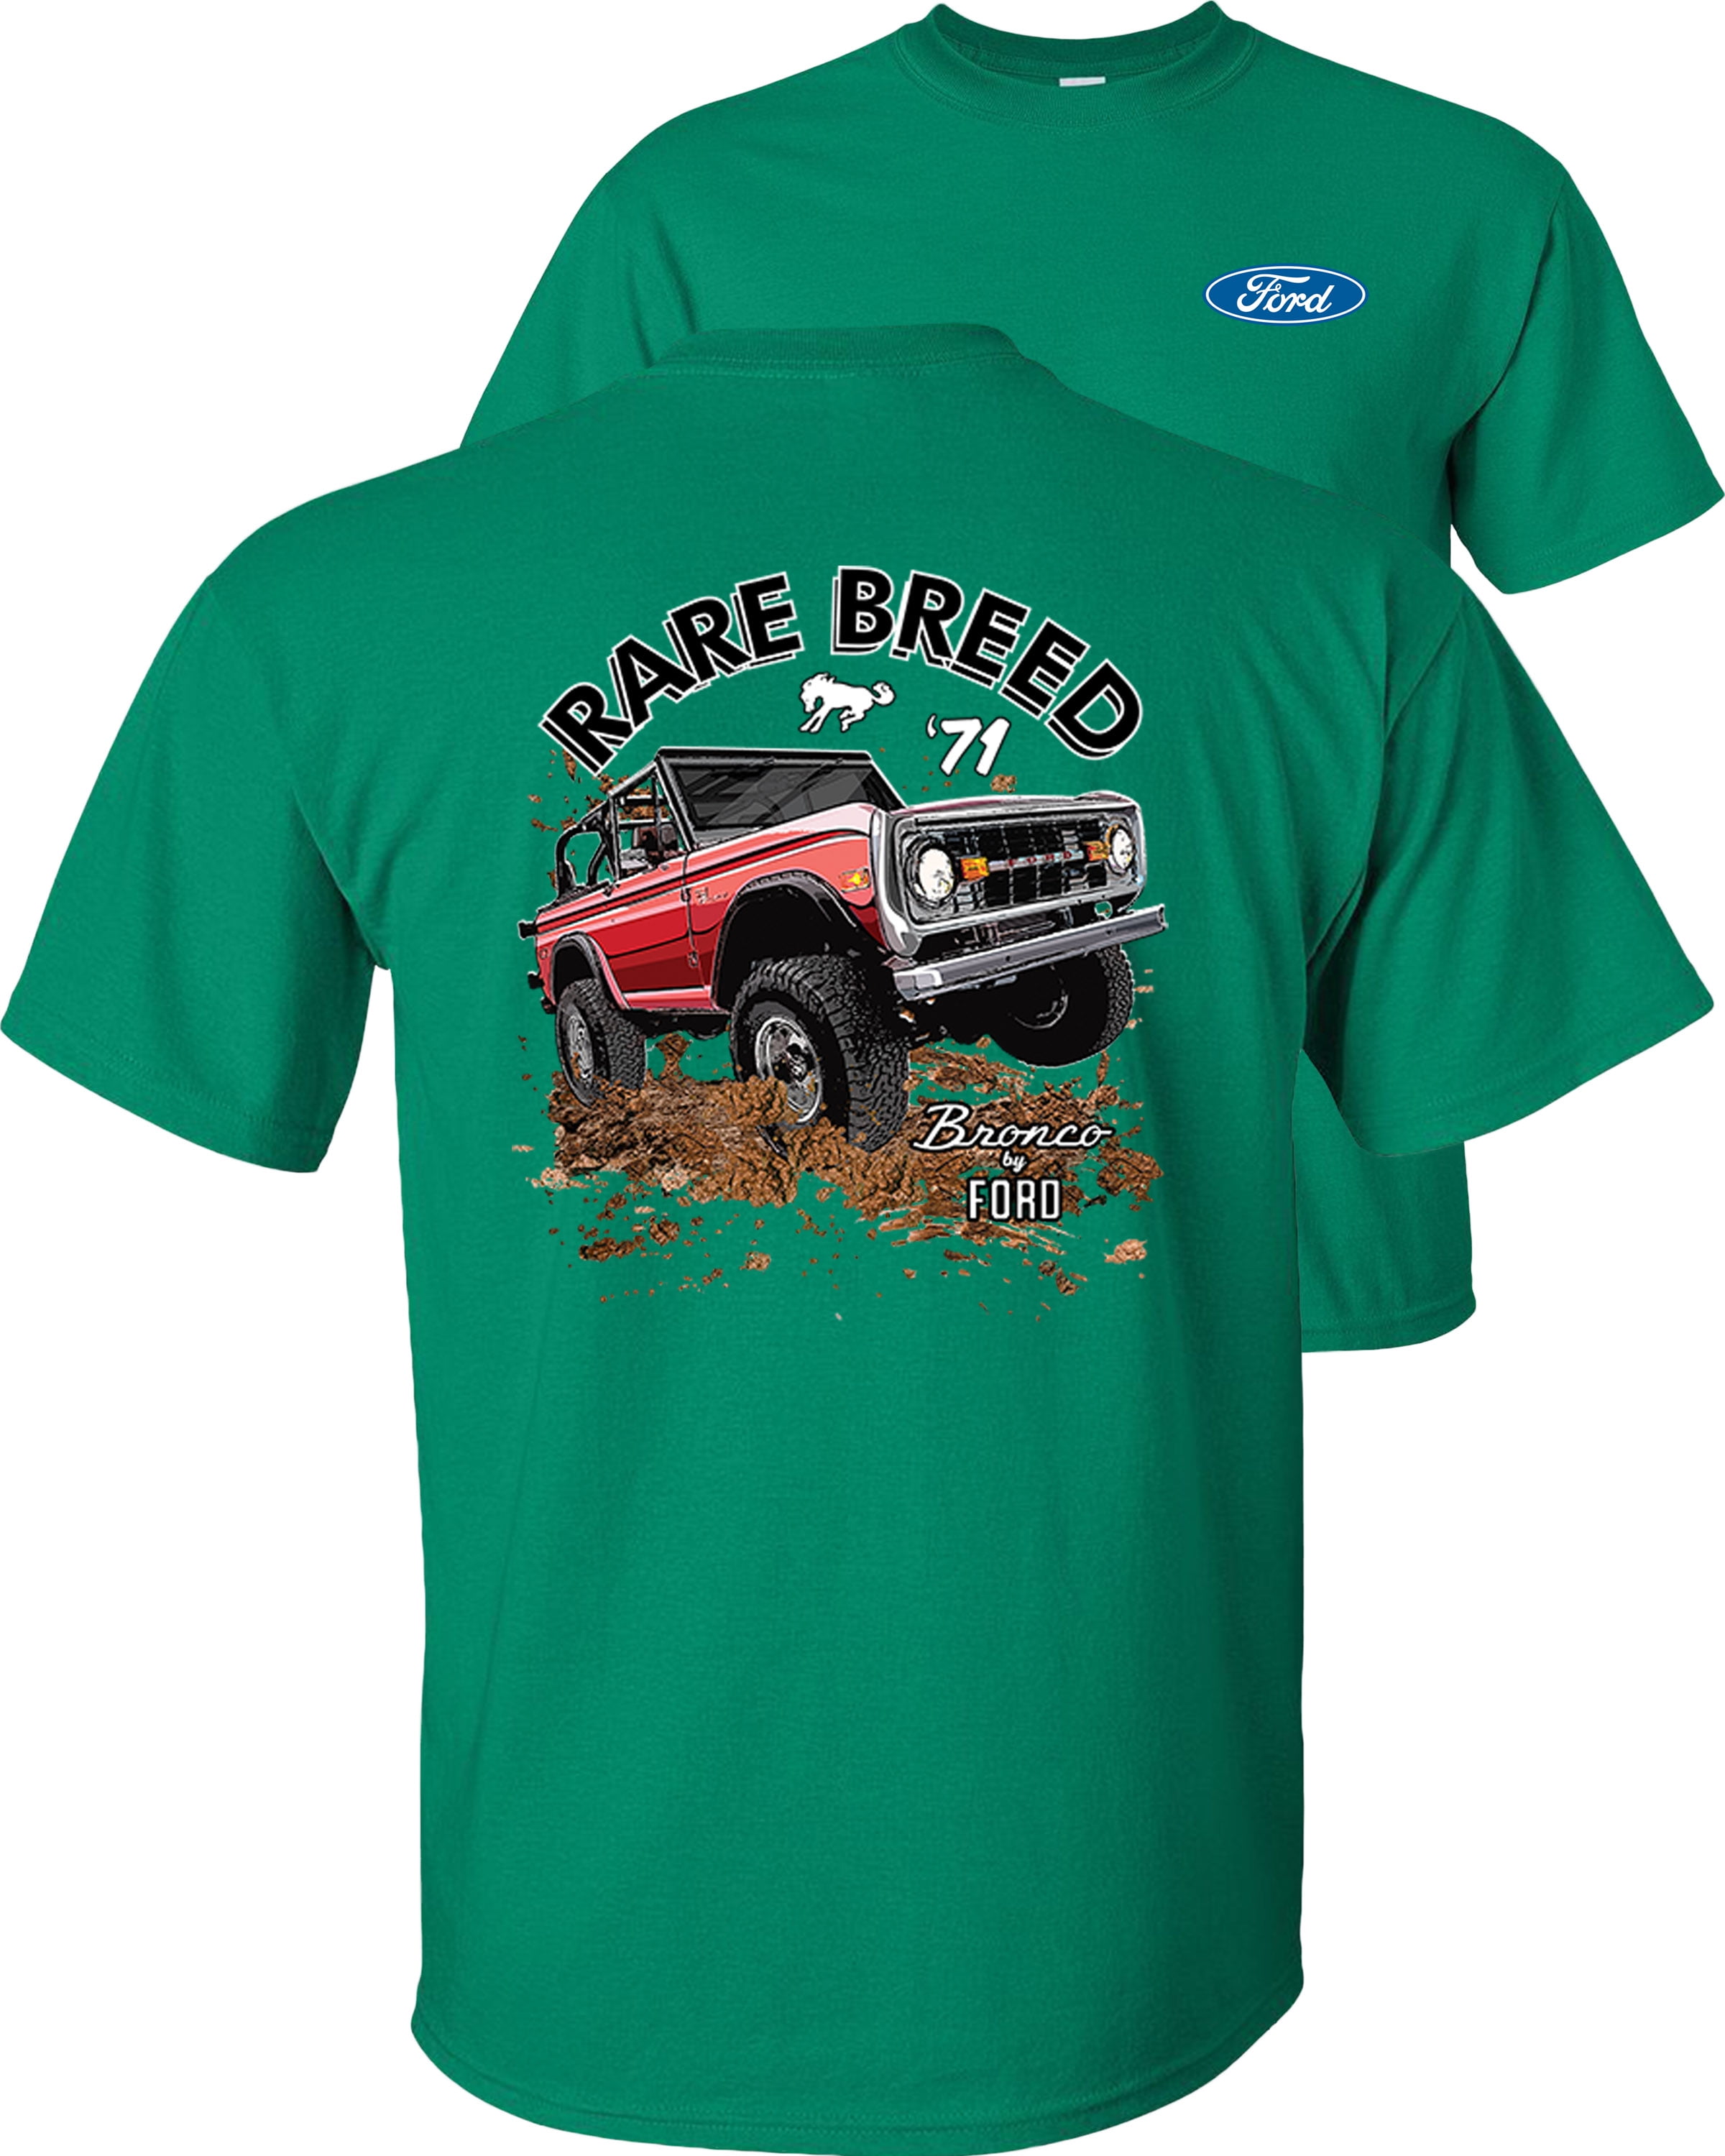 Fair Game Rare Breed Ford Bronco T-Shirt, Classic Vintage Retro Bronco 1971 Truck, Ford Graphic Tee-Kelly Green-3x, Adult Unisex, Size: 3XL